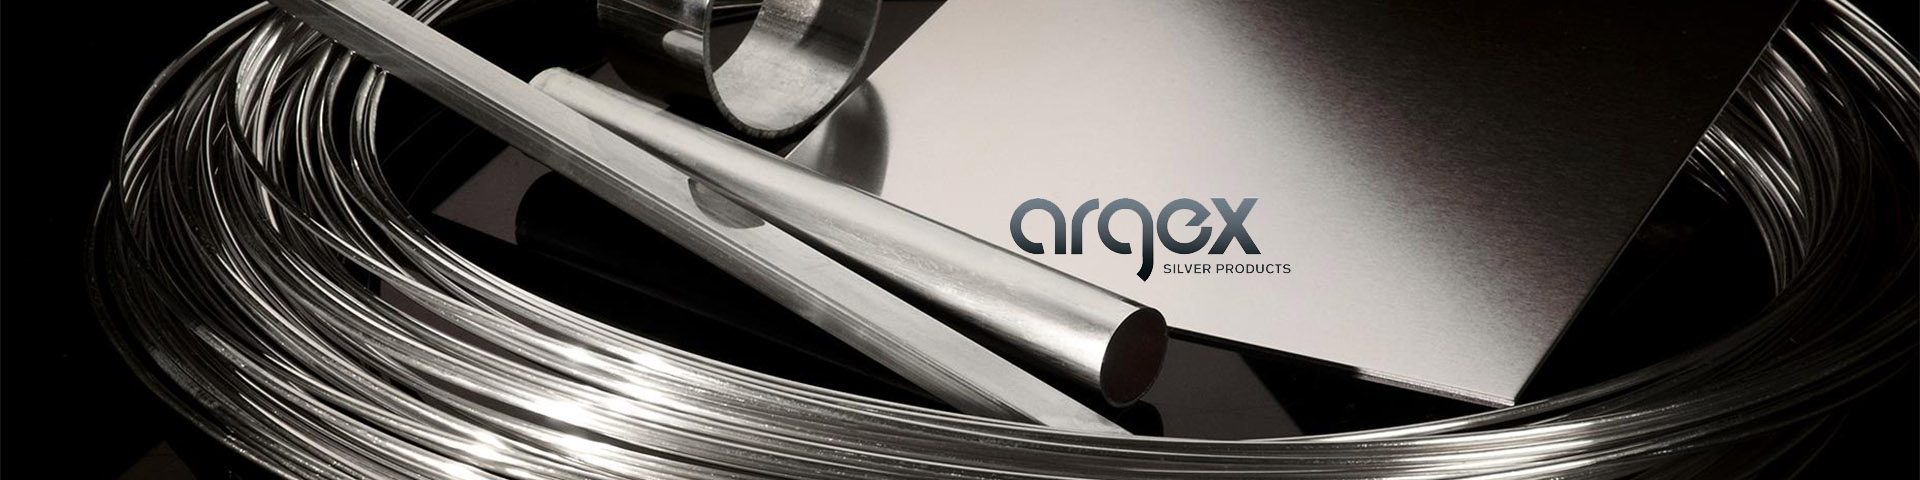 Argex Silver Products banner image